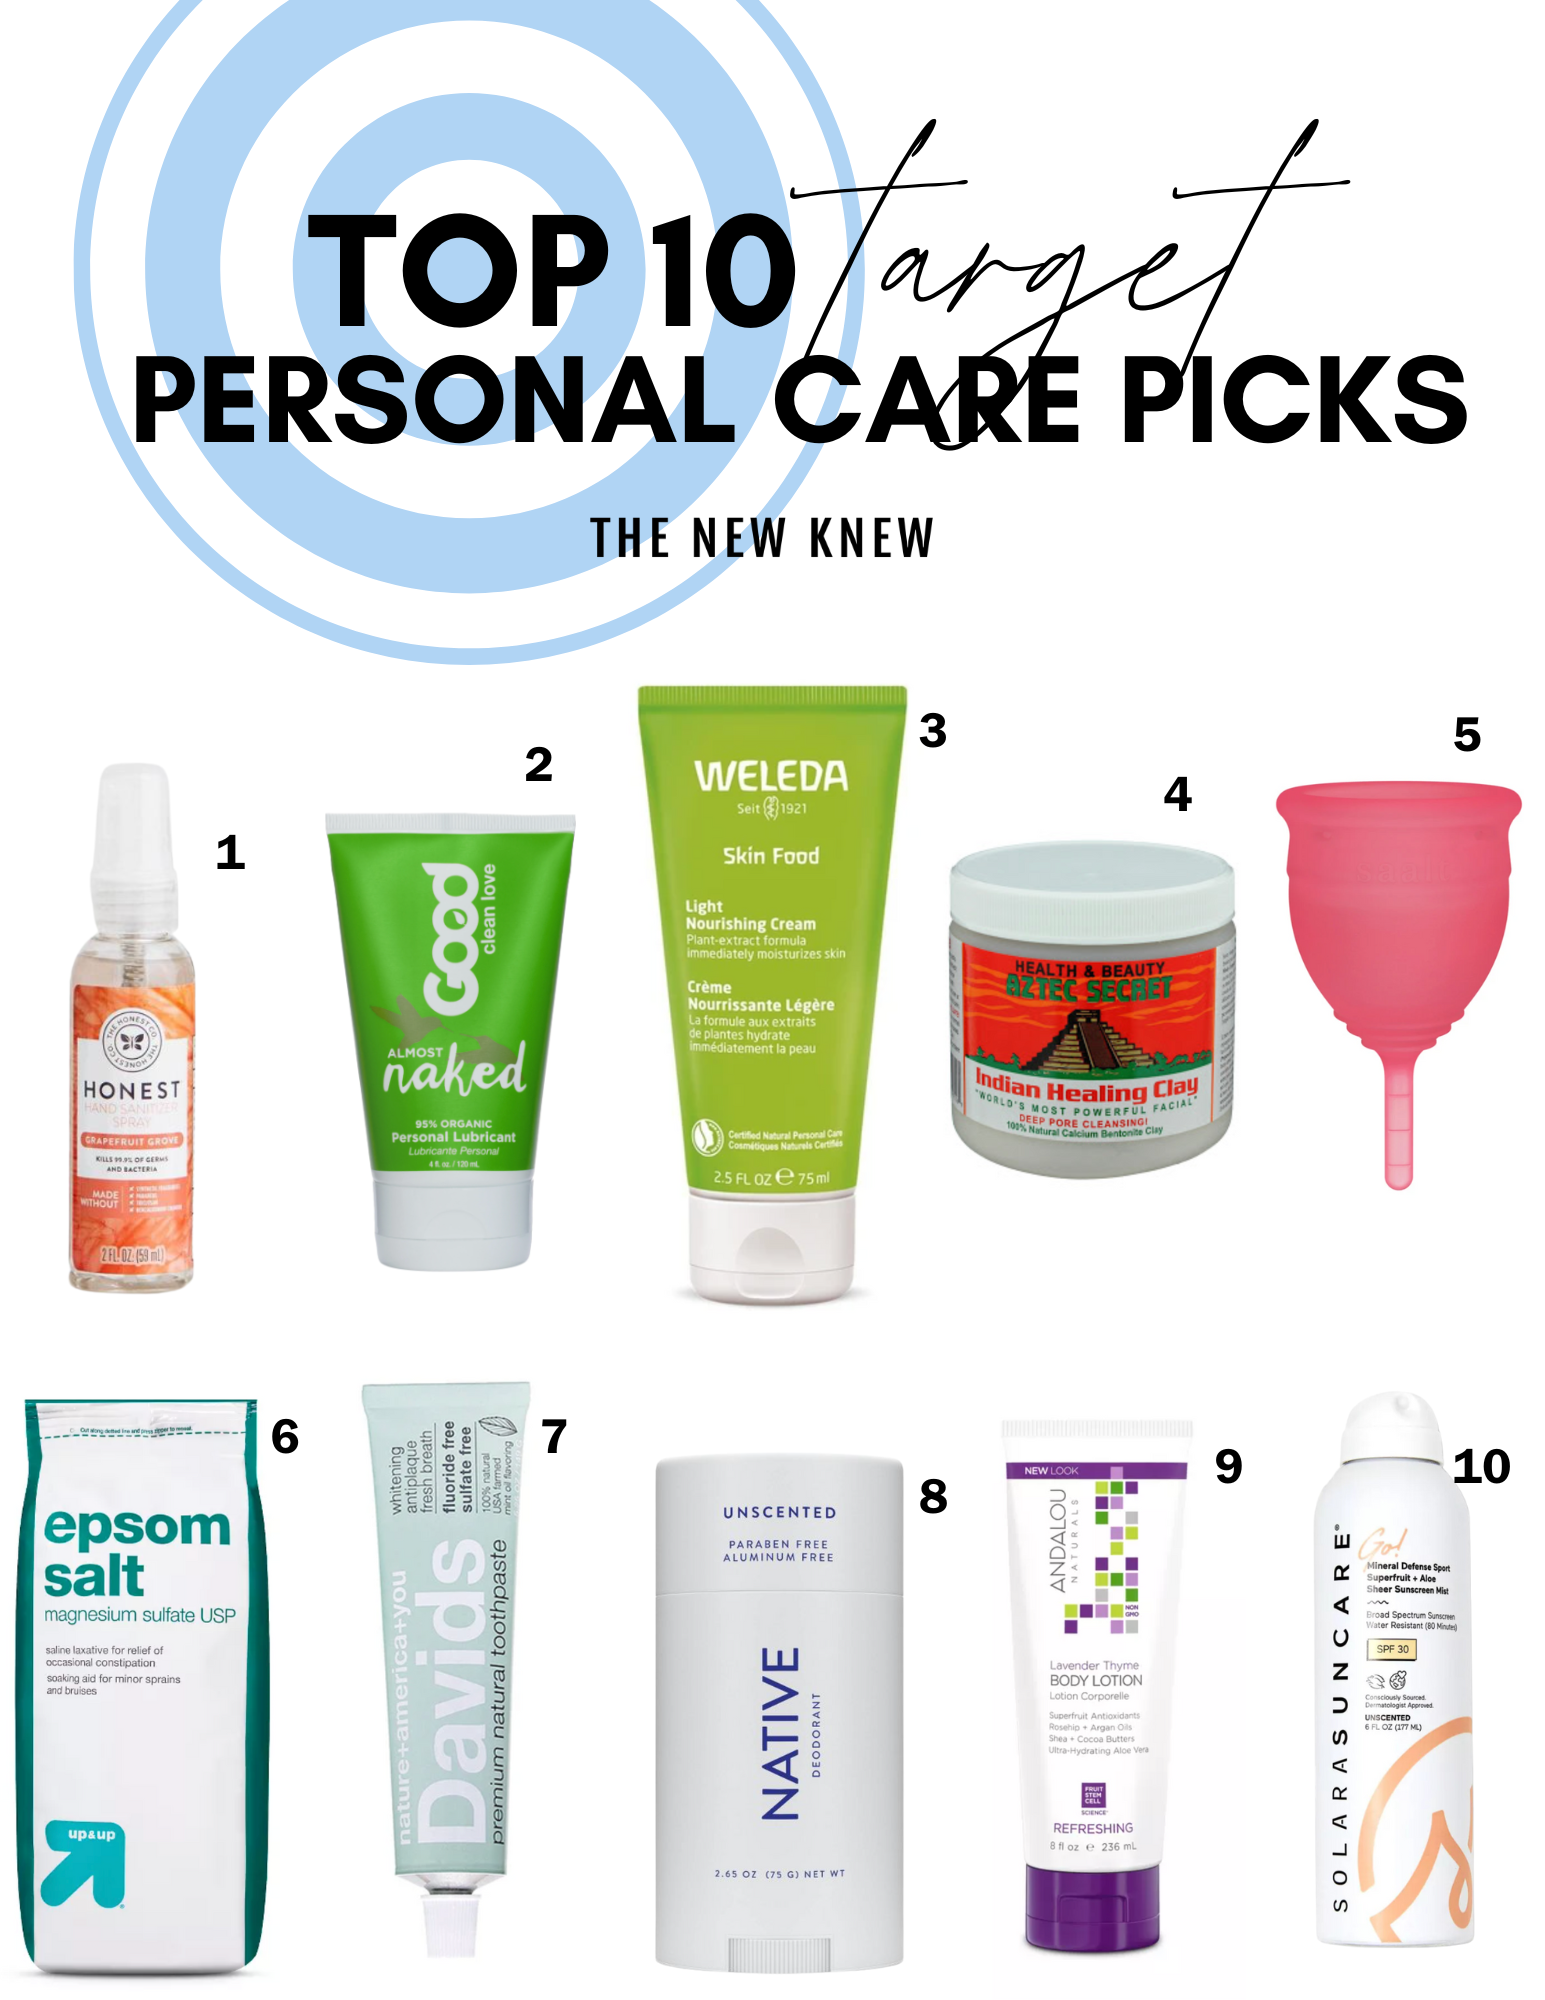 Top 10 Target Personal Care Picks by TNK.